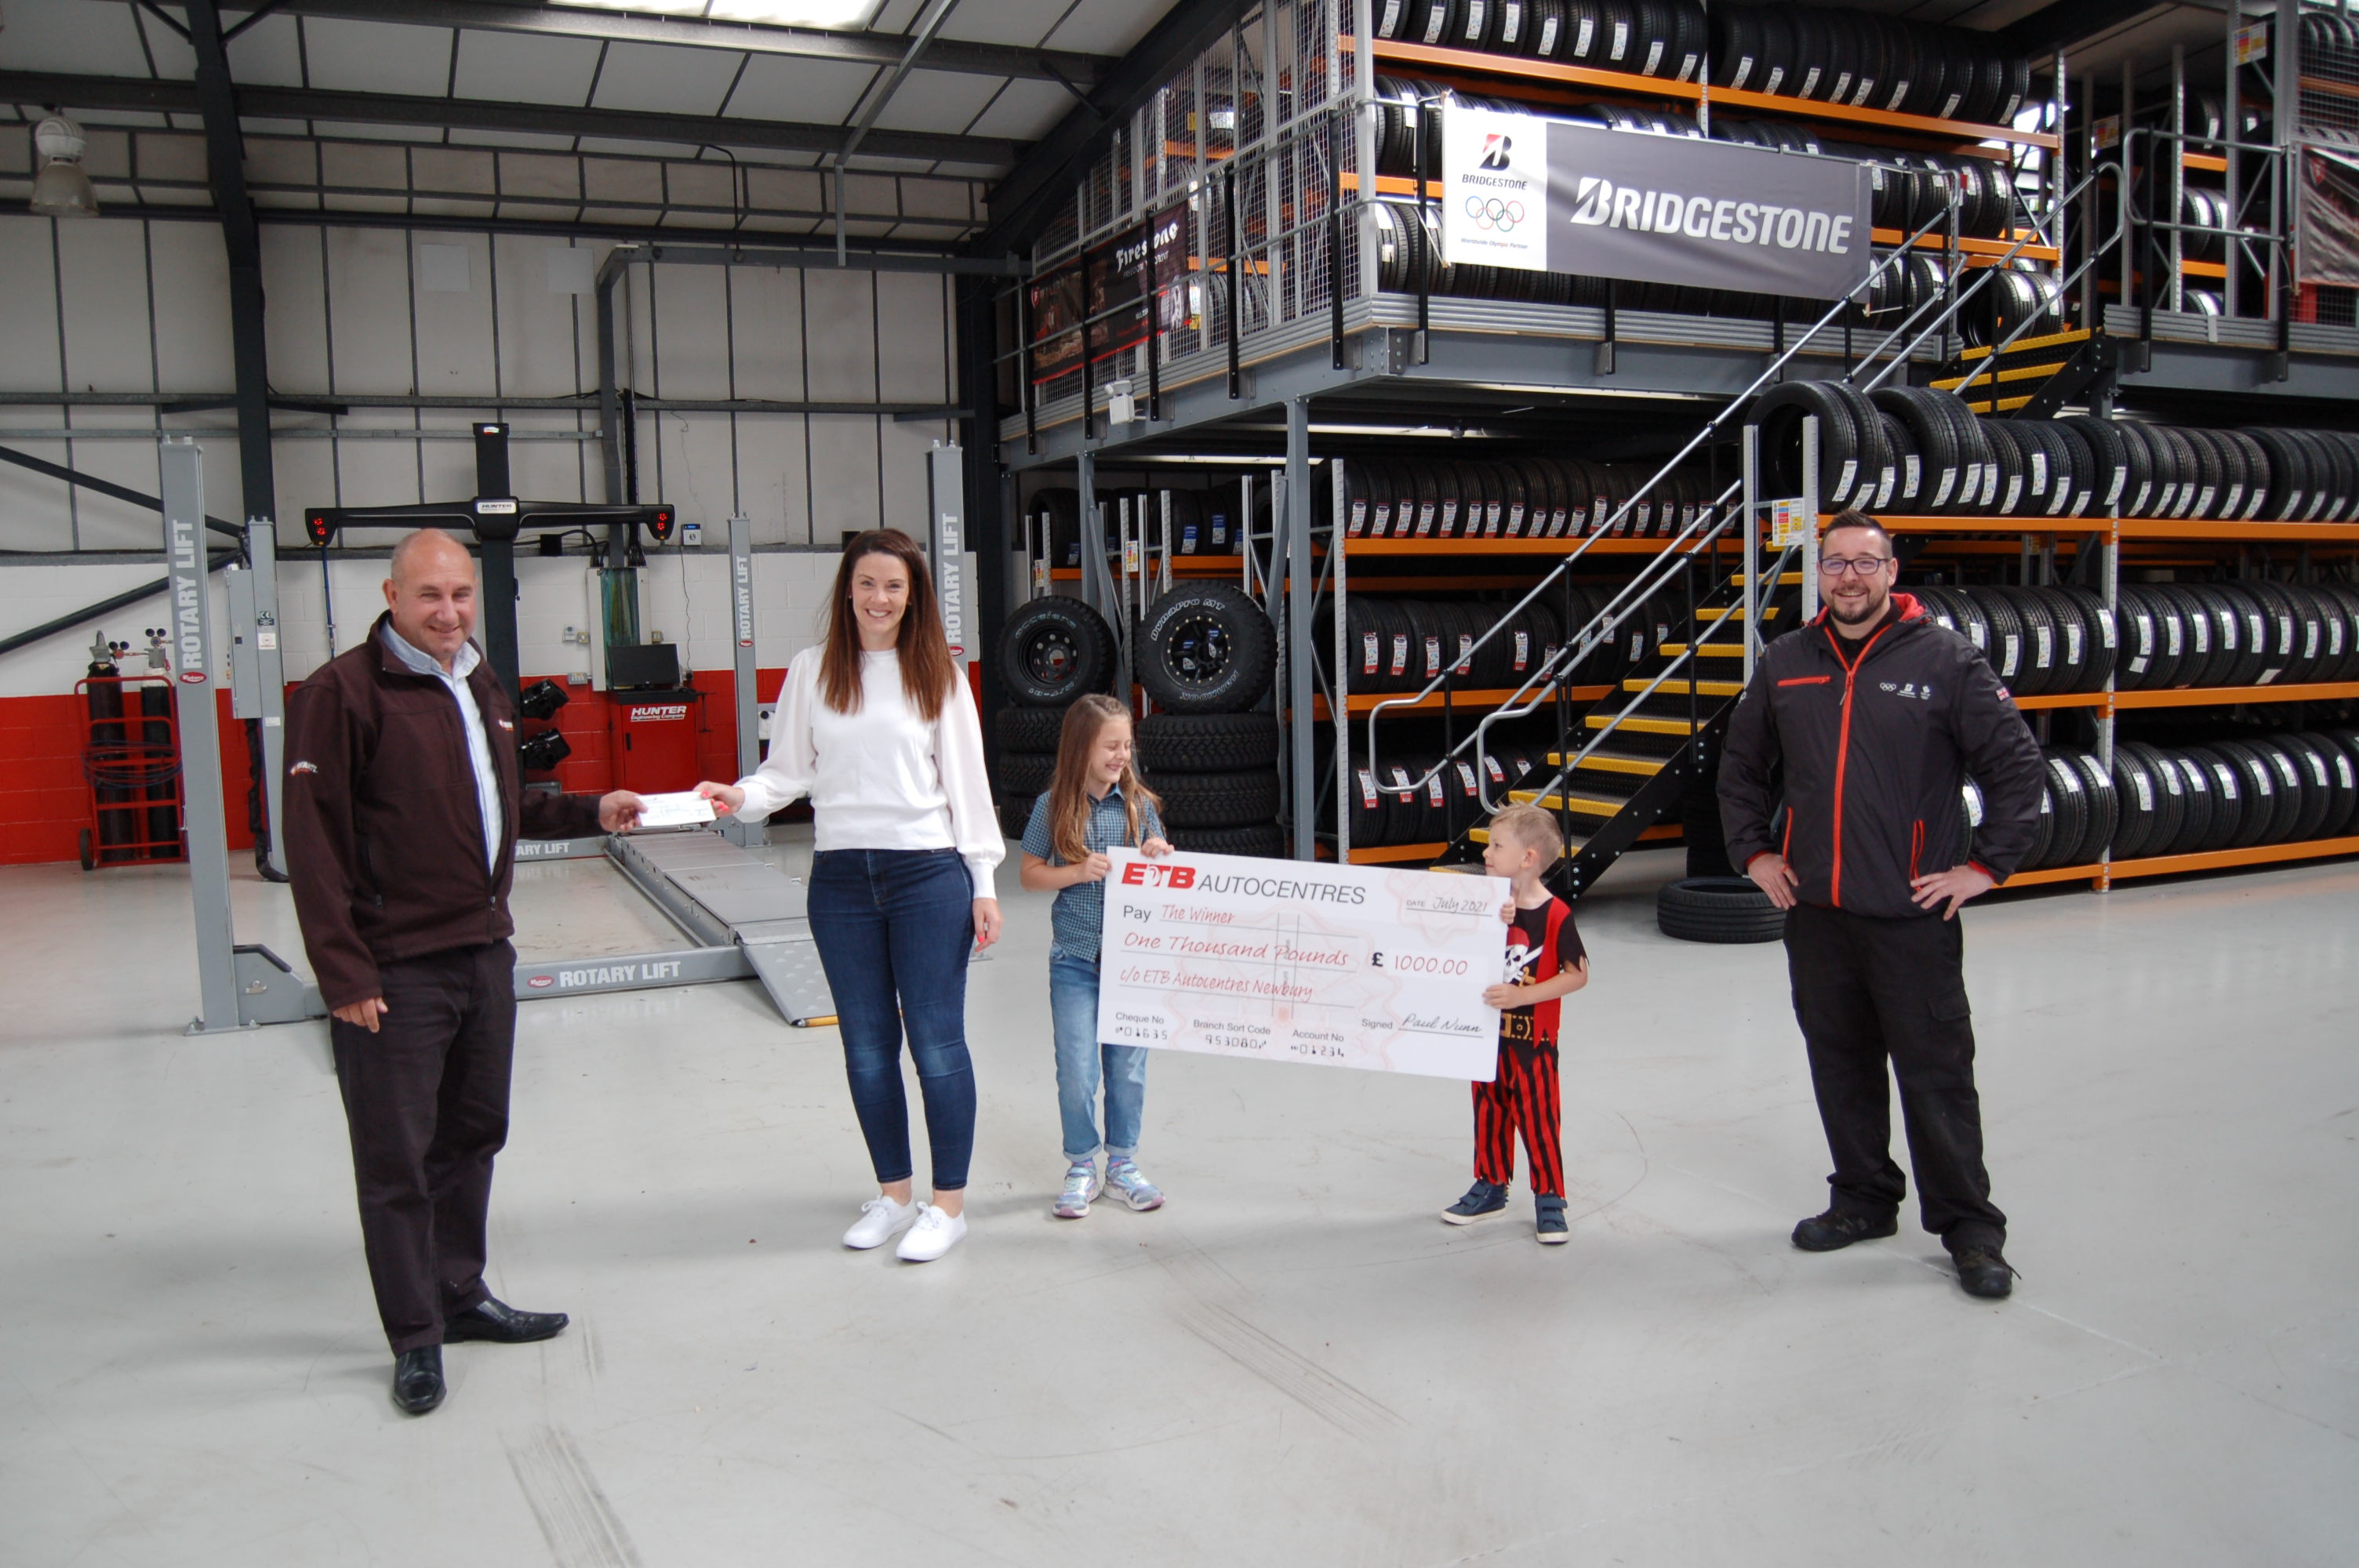 ETB’s Retail Director Paul Nunn hands over a cheque for £1,000